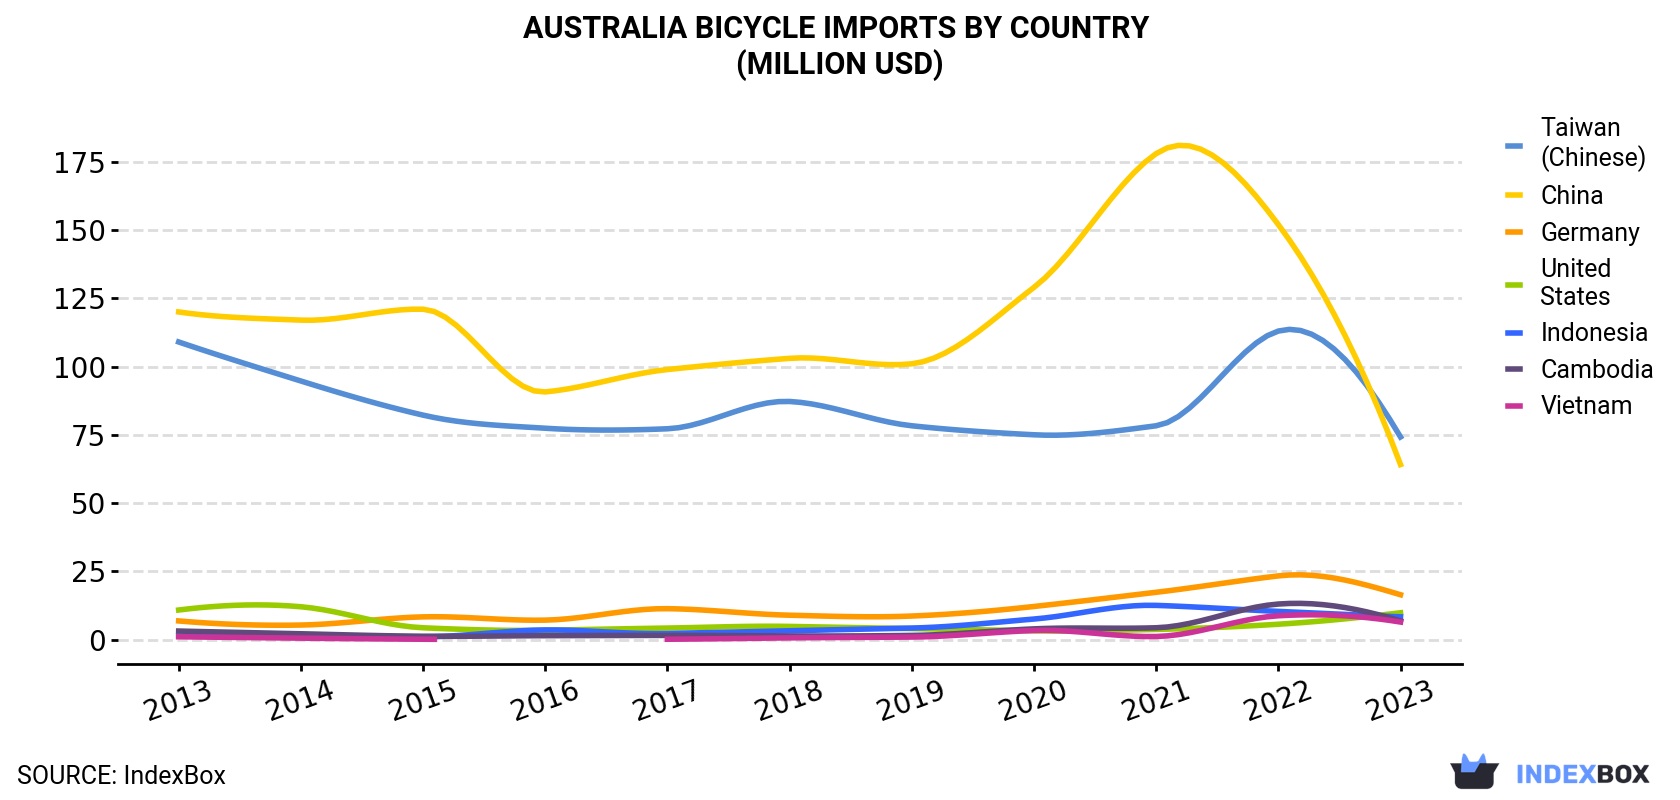 Australia Bicycle Imports By Country (Million USD)